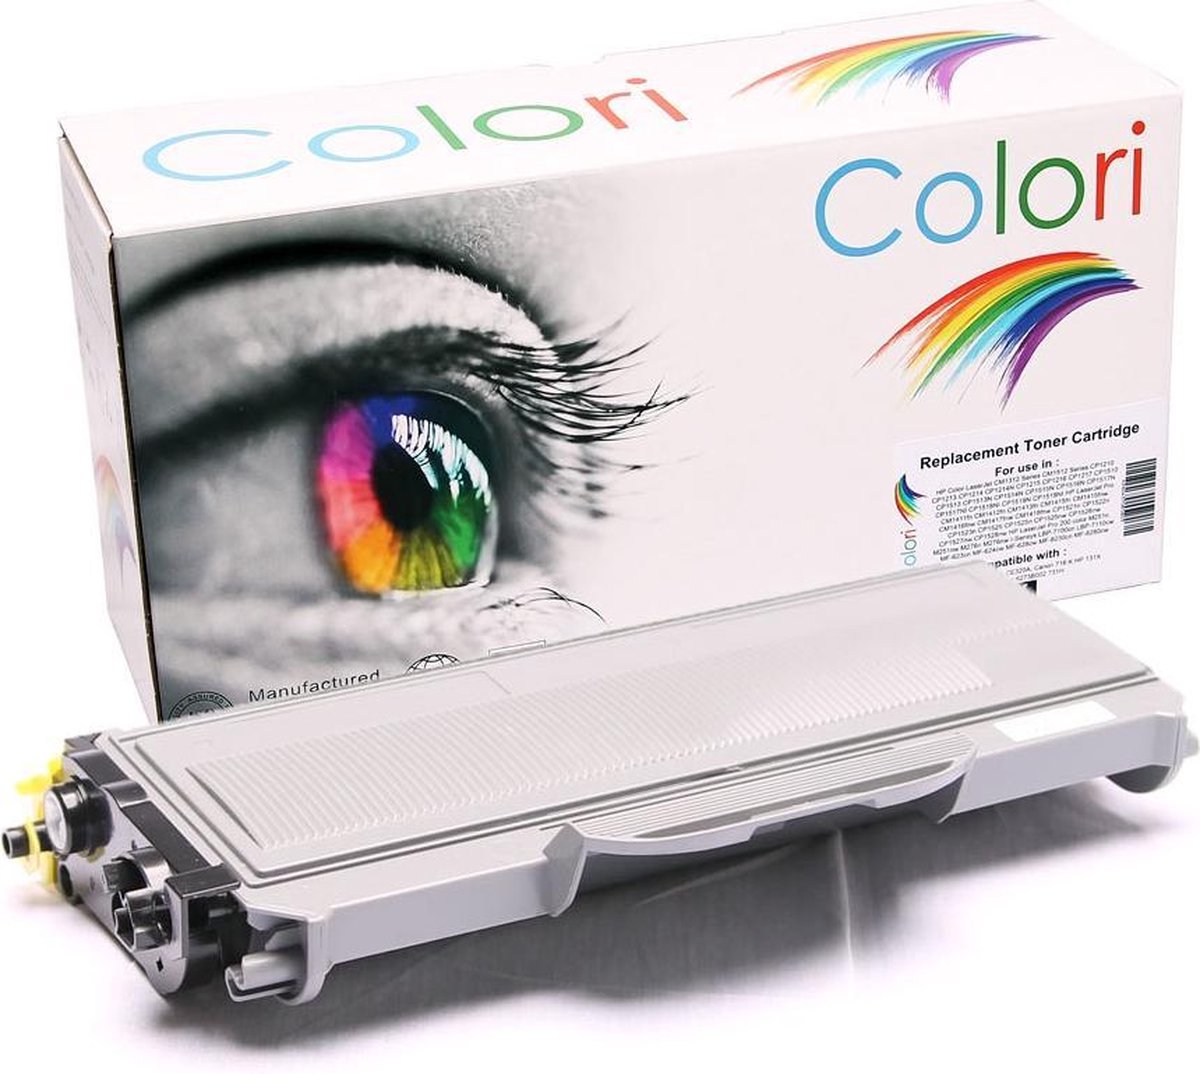 Colori huismerk toner geschikt voor Brother TN-2120 voor DCP-7030 DCP-7032 DCP-7040 DCP-7045N HL-2140 HL-2150N HL-2150NR HL-2170N HL-2170W HL-2170WR MFC-7320 MFC-7320W MFC-7340 MFC-7440N MFC7440W MFC7840W